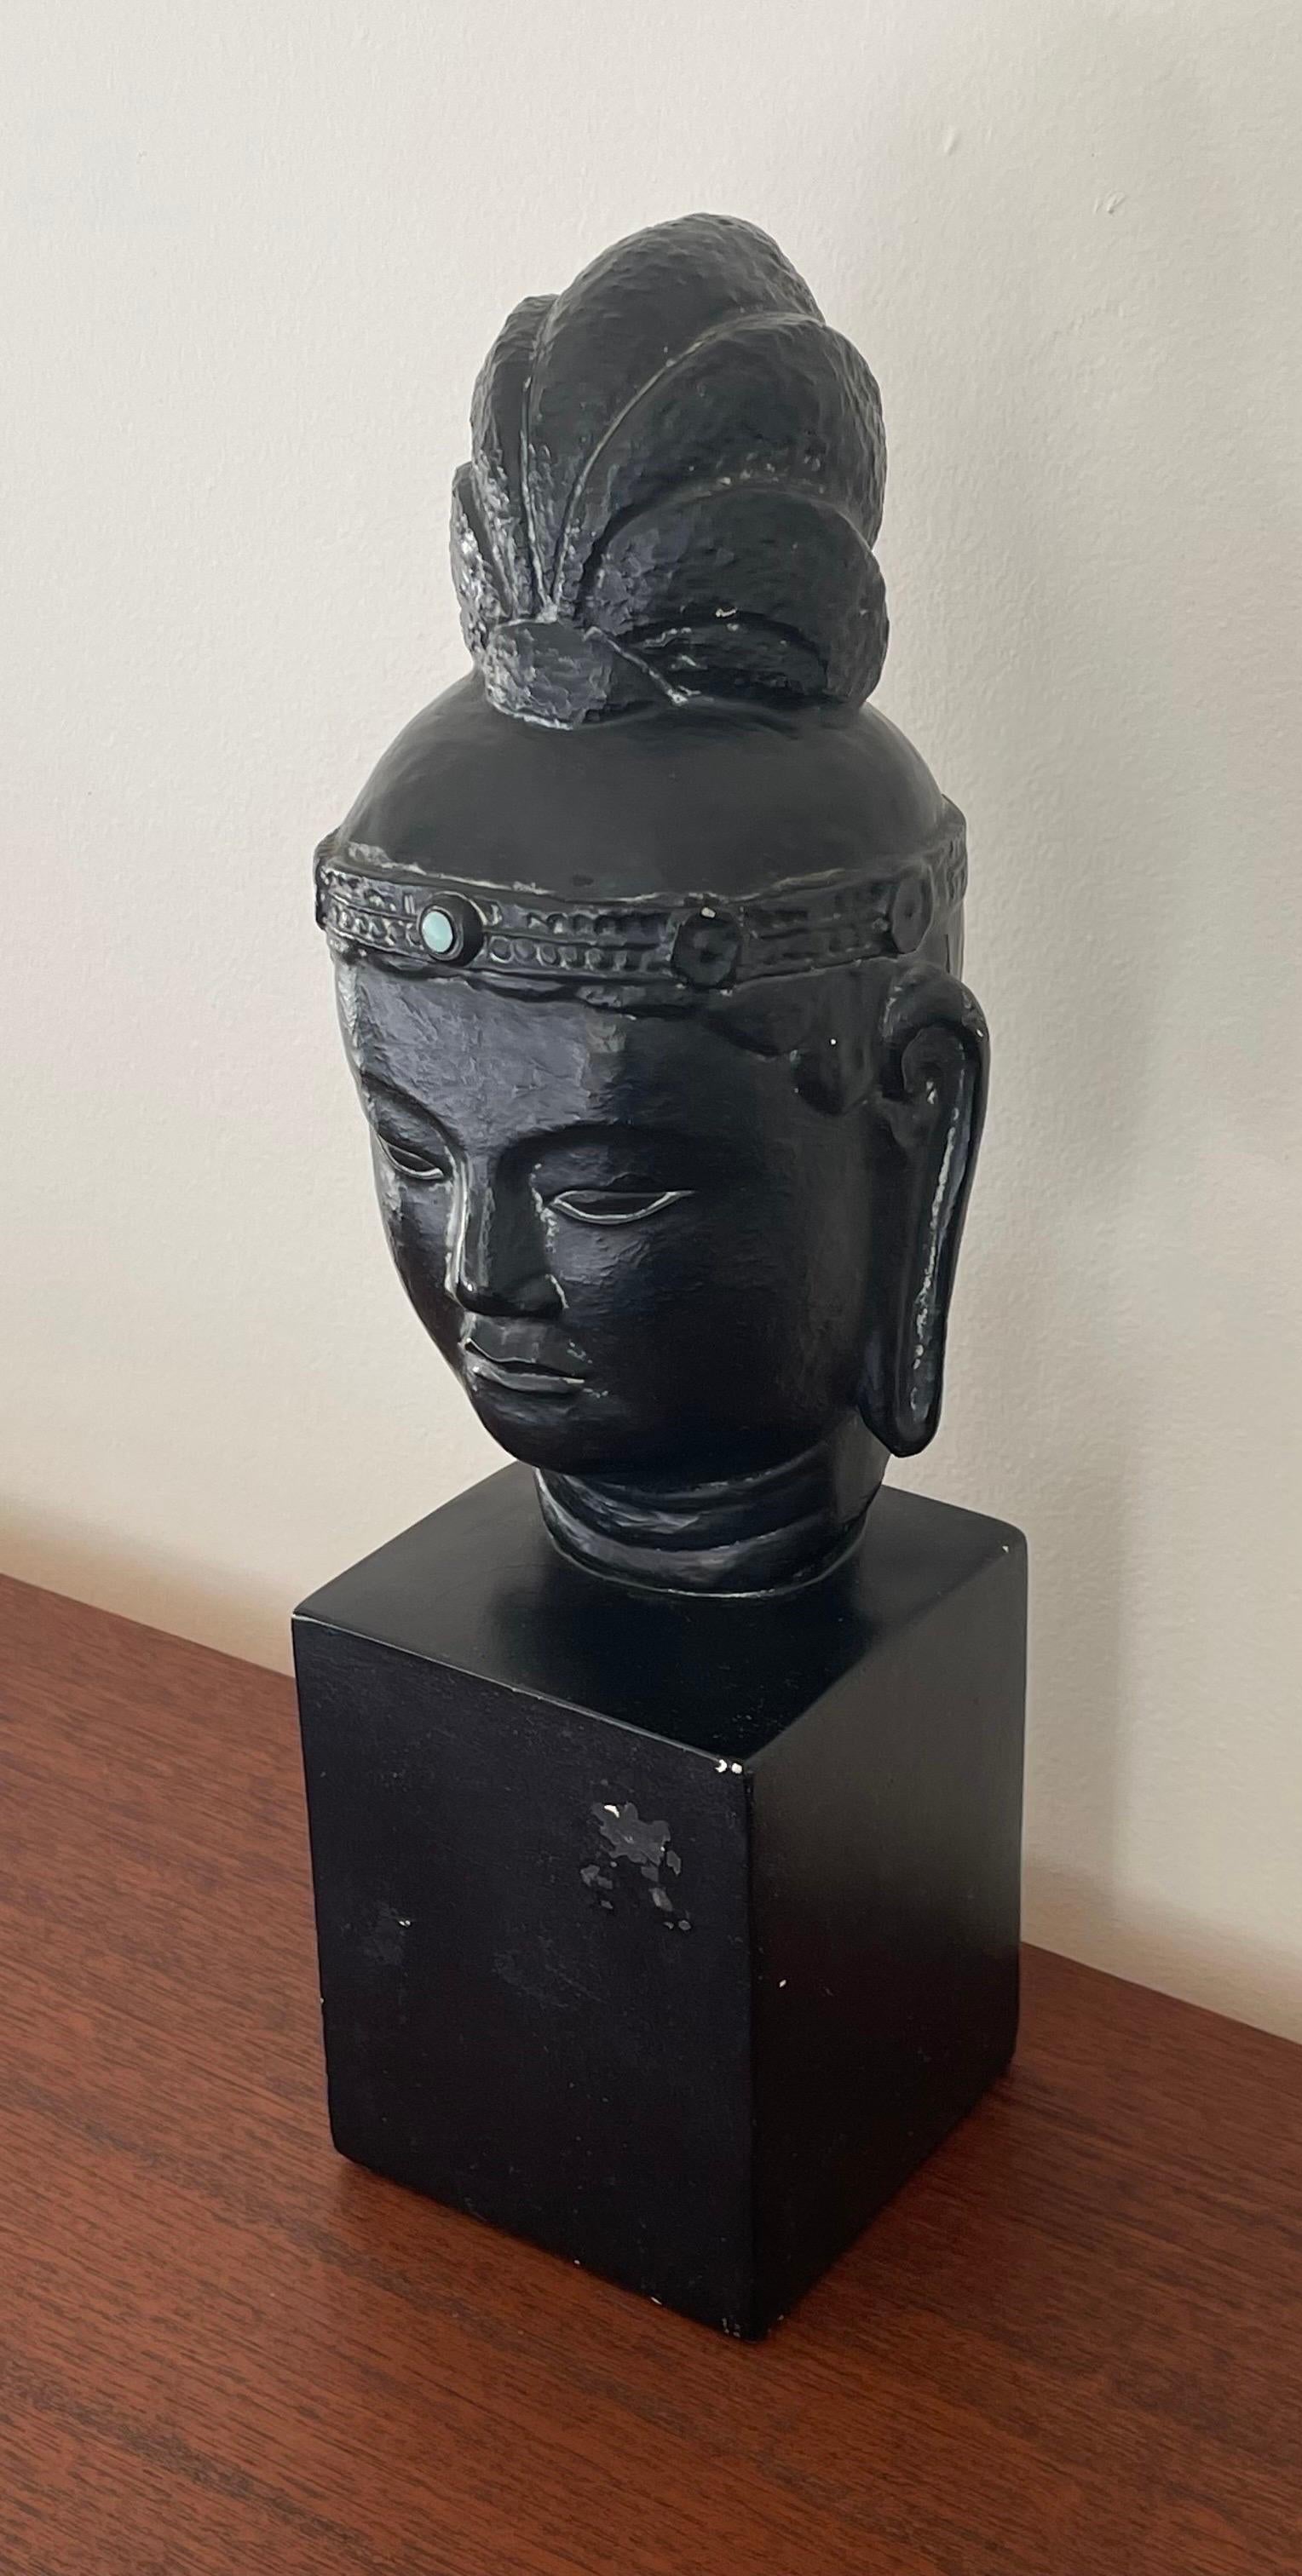 Very cool mid-century black Buddha head by Alexander Backer, 1950's, made of plaster composite, hallmarked.